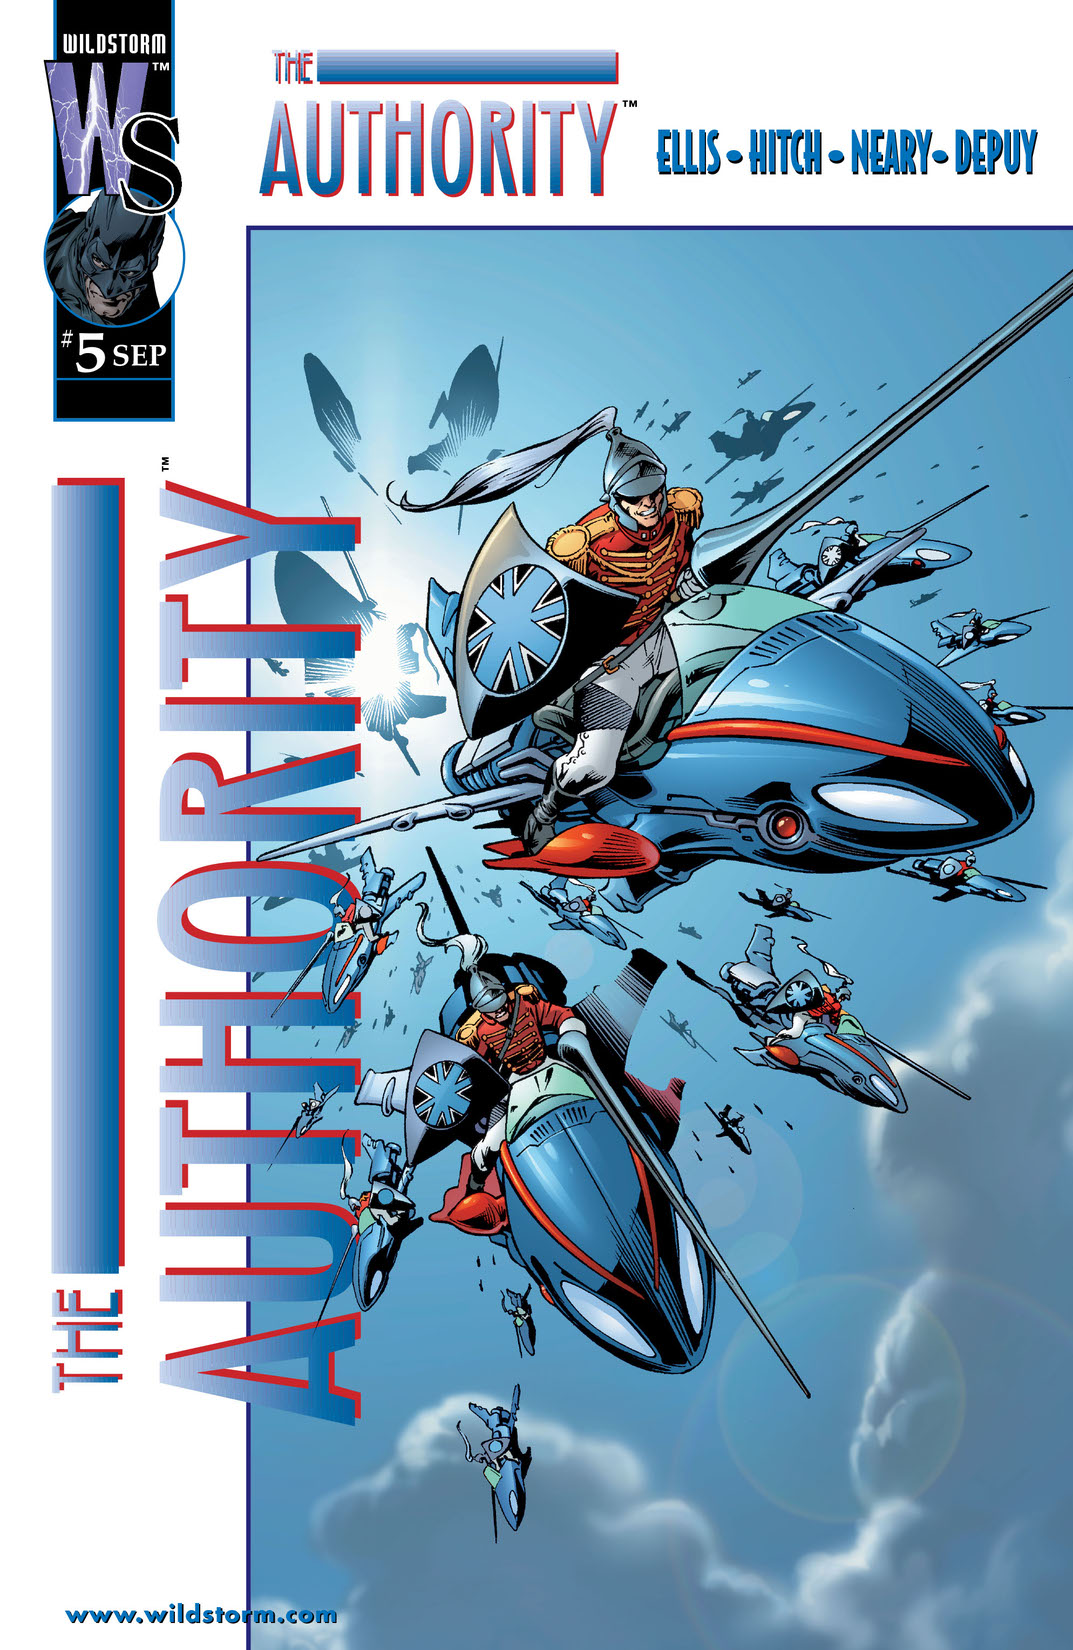 The Authority (1999-) #5 preview images